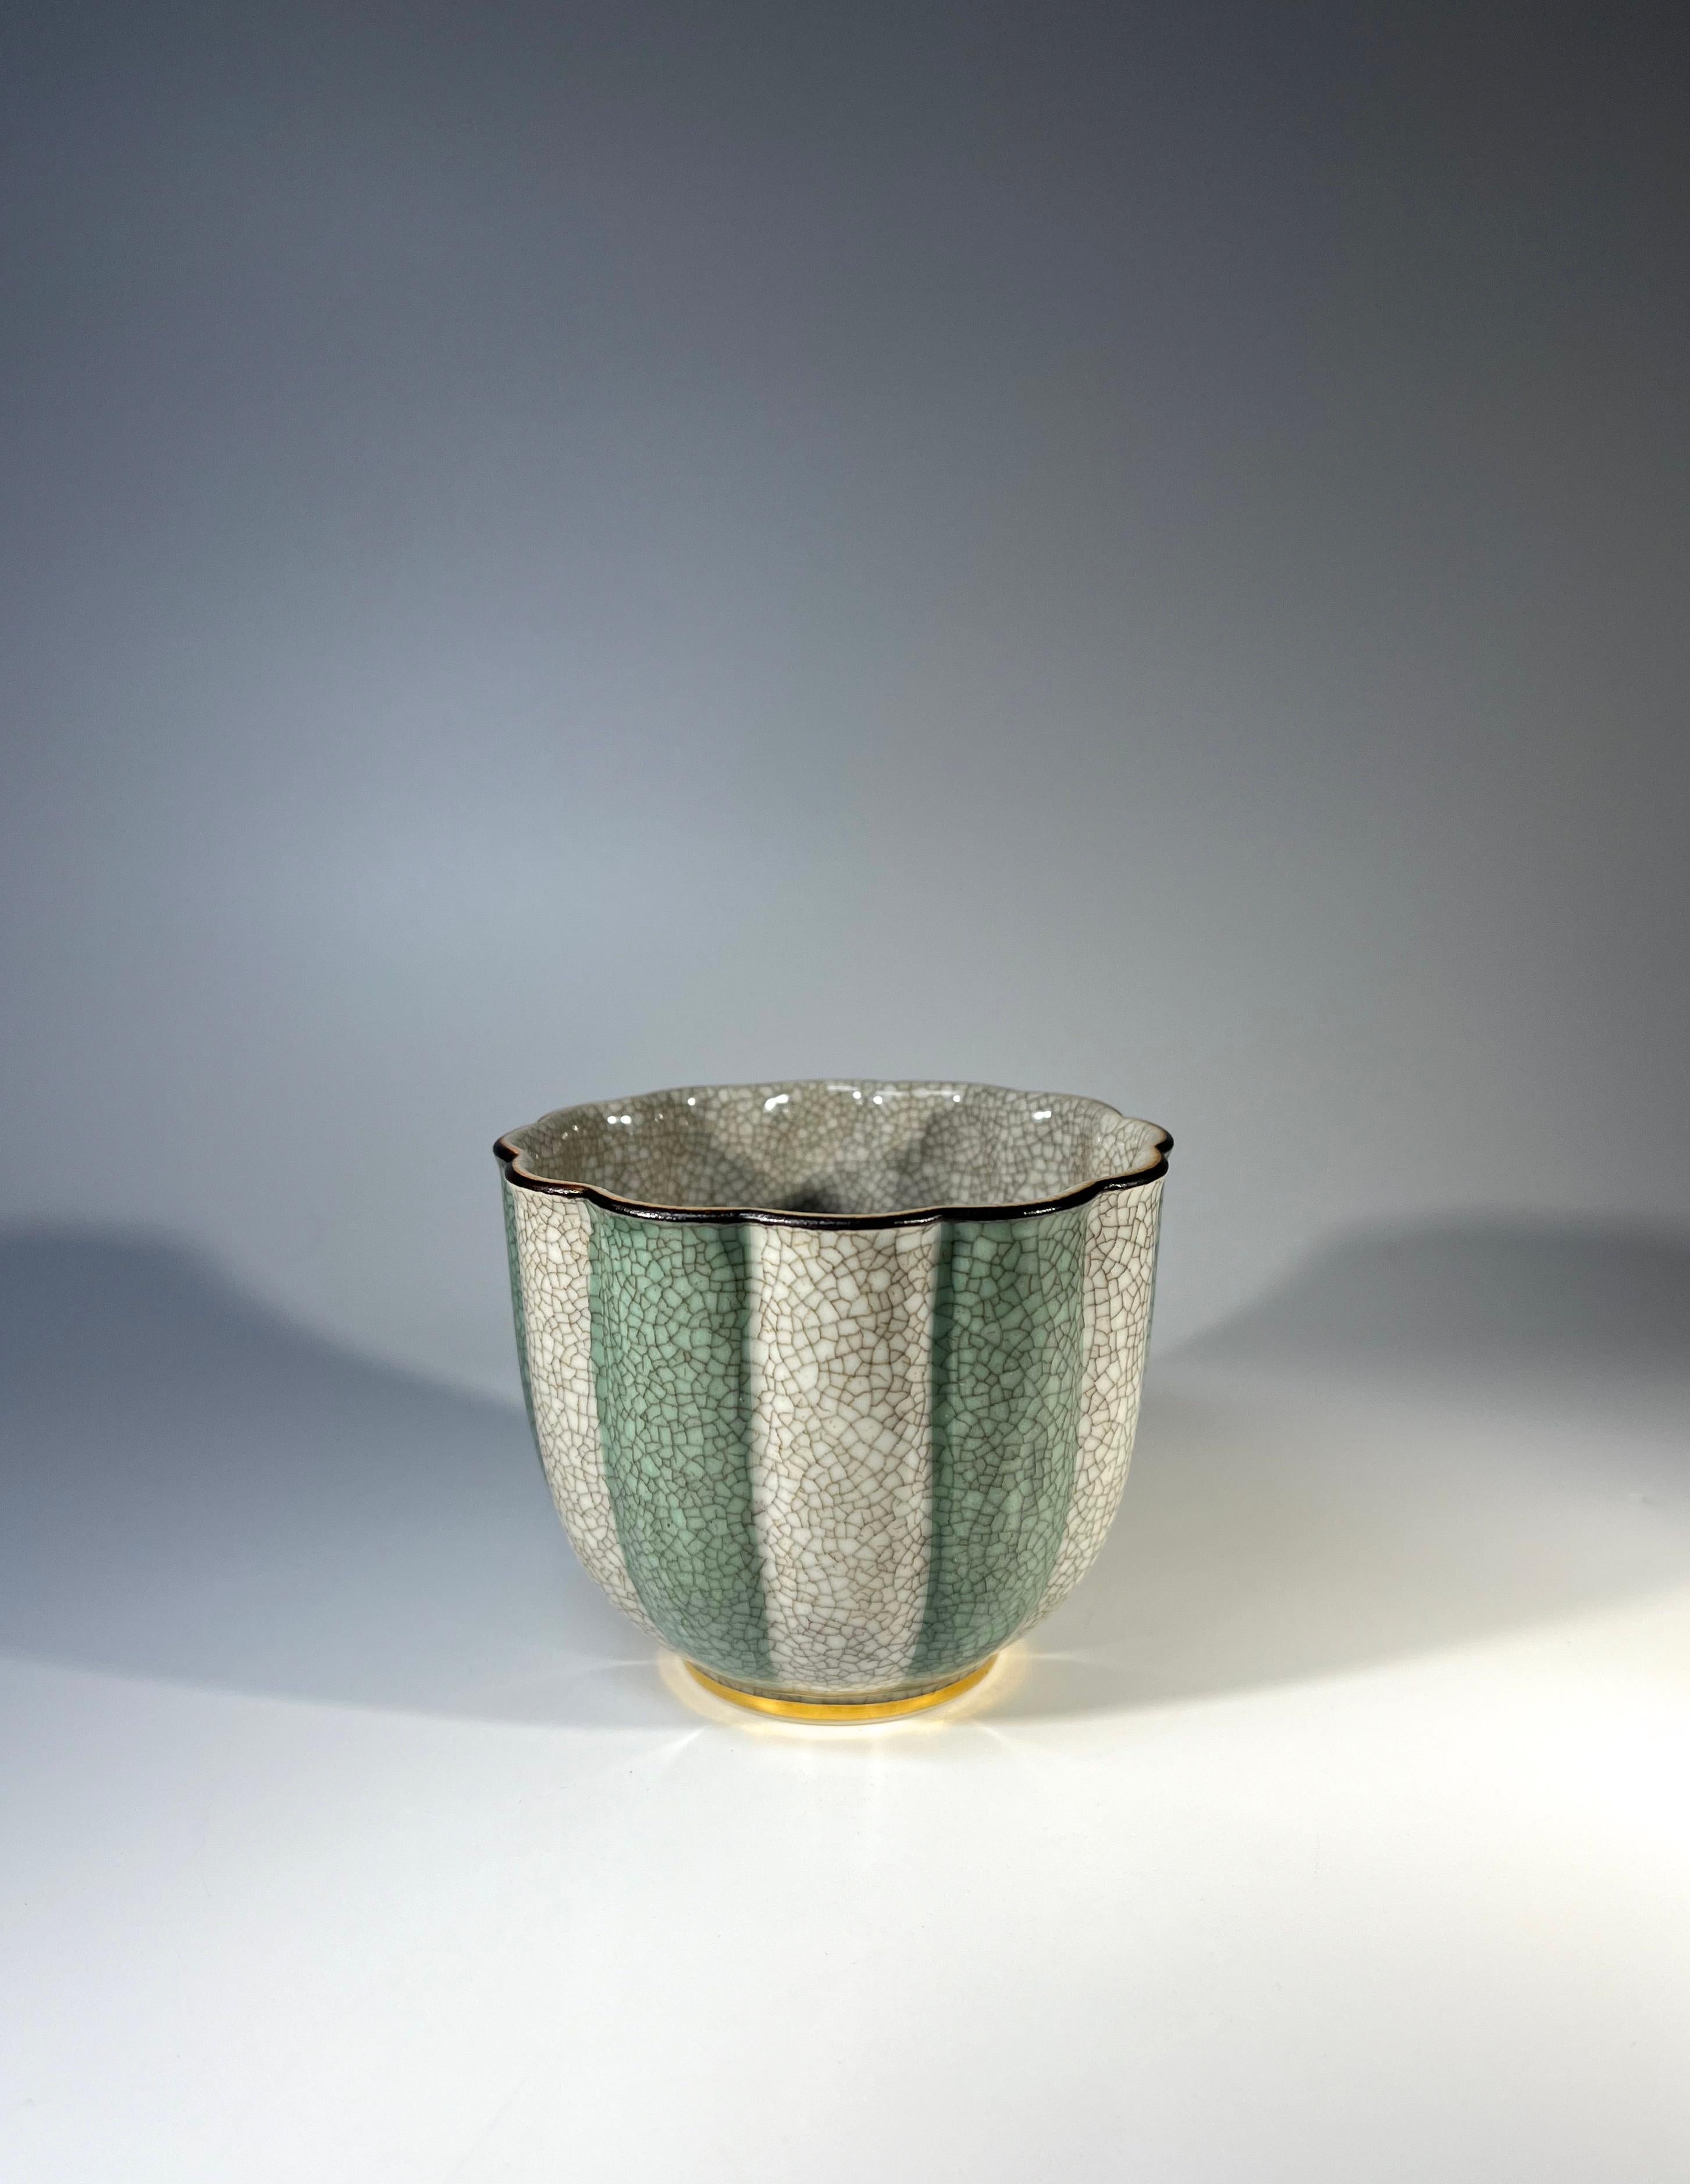 Petit Royal Copenhagen porcelain gilded sage green and grey crackle glazed cache pot
The exterior of the pot has sage green and grey striped decoration with a fine gilded band at foot and dark brown rim
The inner is a grey crackle glaze
Circa